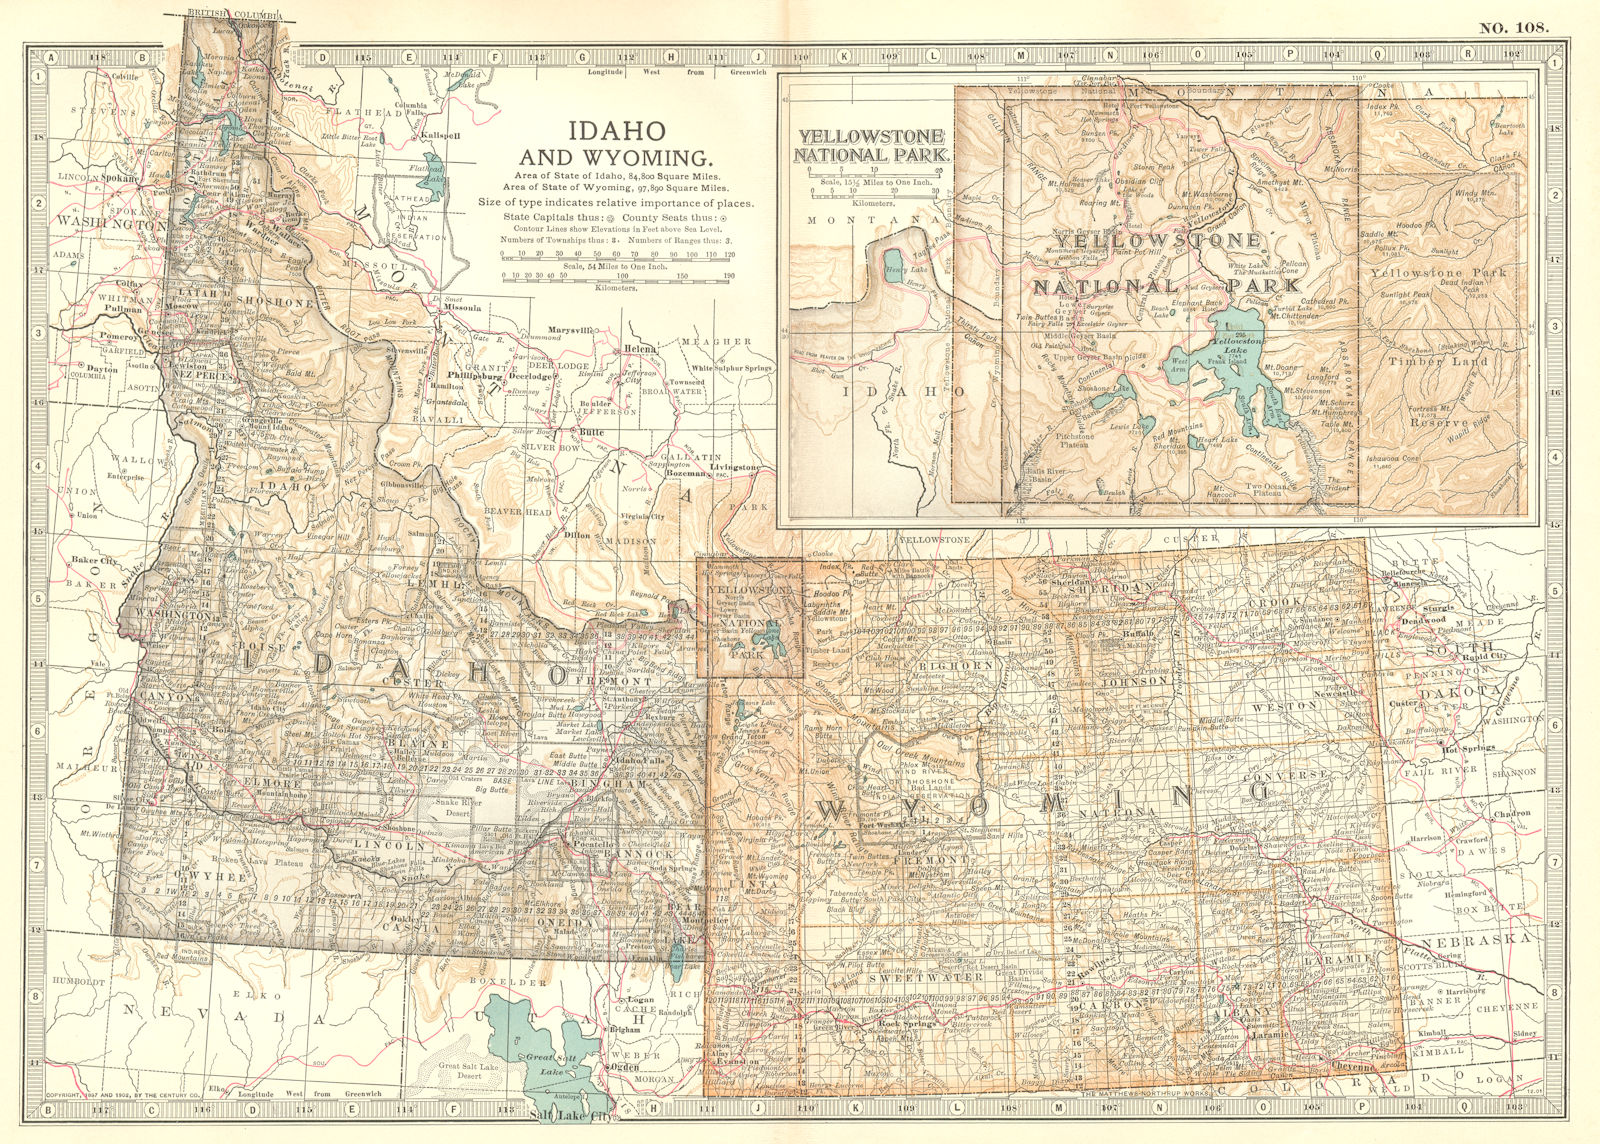 IDAHO & WYOMING. State map showing counties. Inset Yellowstone Park 1903